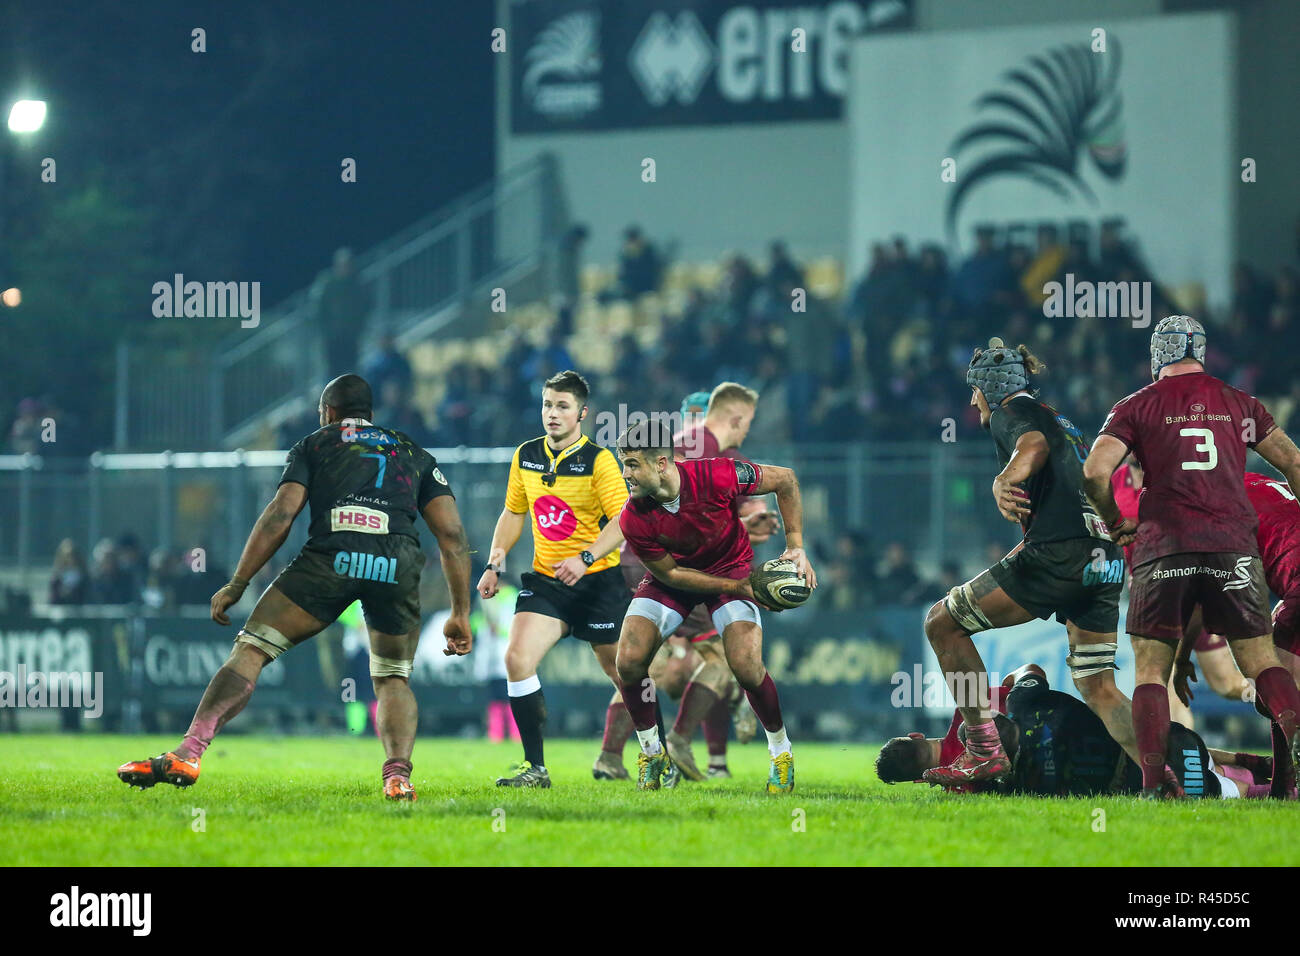 Parma, Italy. 25th November, 2018. Munster's scrum half Conor Murray backs to the field after his injury in the match against Zebre Rugby Club. Here passes the ball to his team mate. ©Massimiliano Carnabuci/Alamy Live news Stock Photo